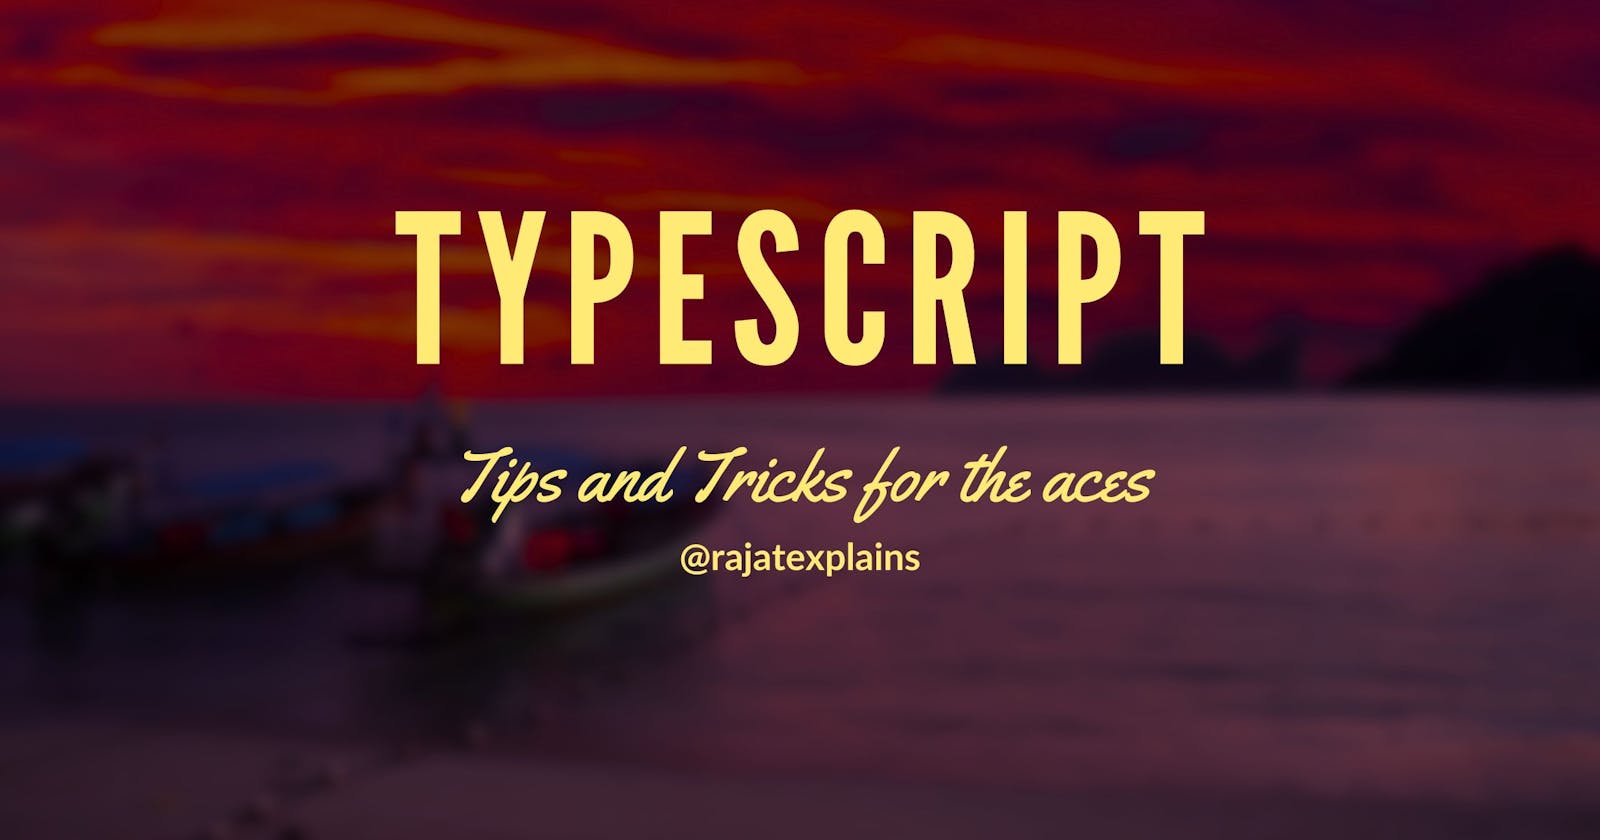 Typescript: Tips and Tricks for Aces